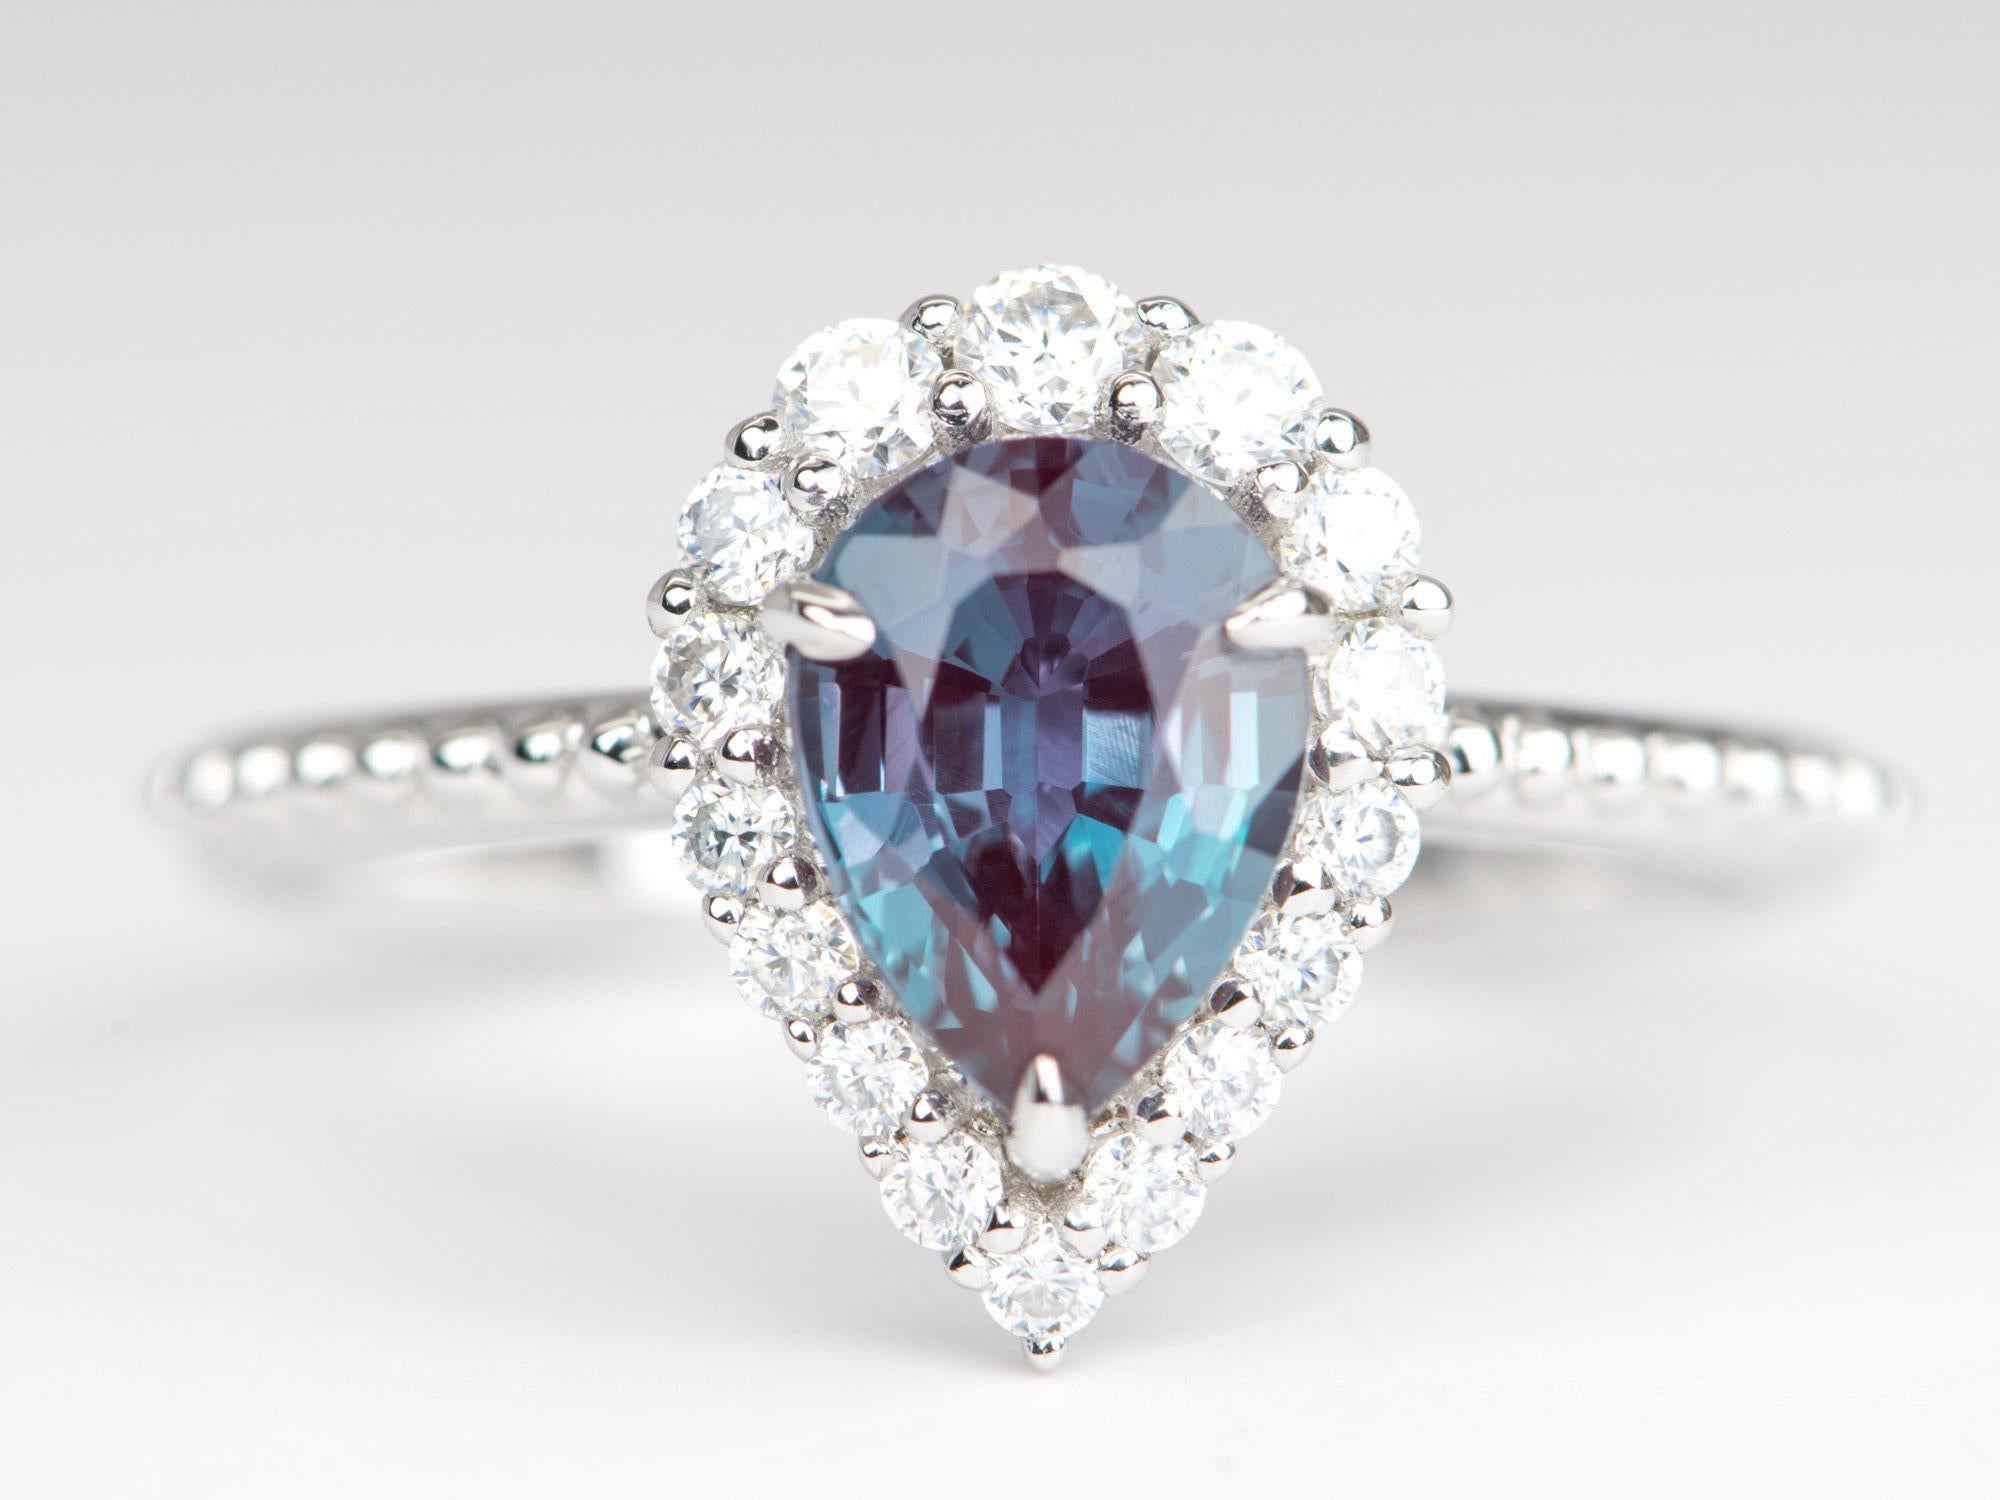 â™¥Â 1.4ct Lab-Created Alexandrite with Moissanite Halo Engagement Ring 14K White Gold
â™¥ Solid 14k white gold ring set with a beautiful pear-shaped lab-created alexandrite
â™¥ Gorgeous blue color!
â™¥ The item measures 12.7 mm in length, 9.3 mm in